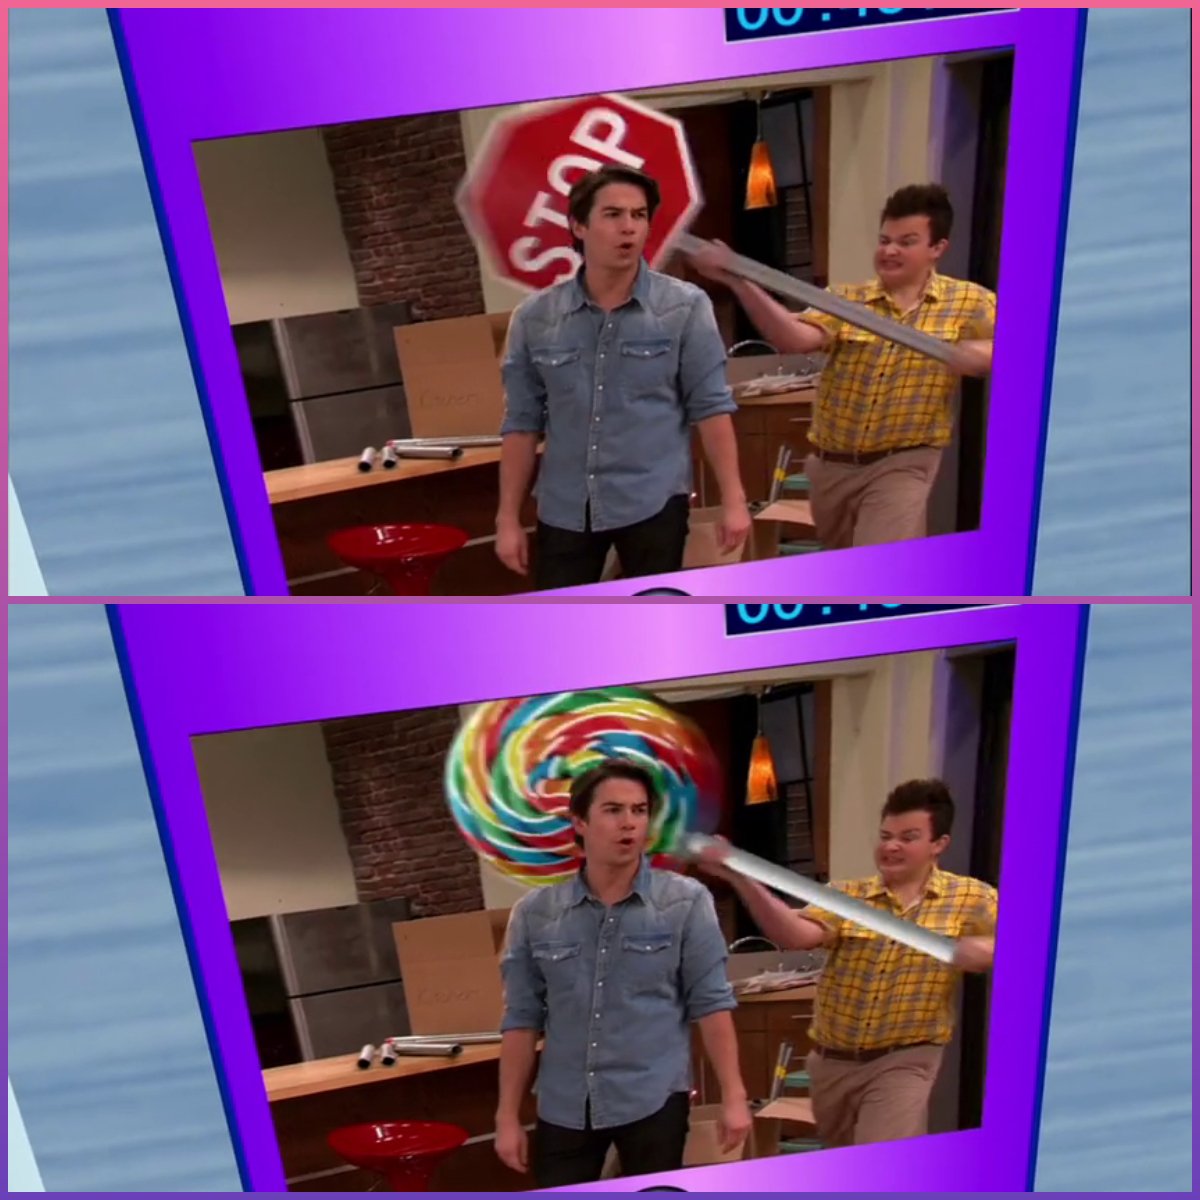 https://thepearsource.wordpress.com/shows/icarly/clips/title-sequence 